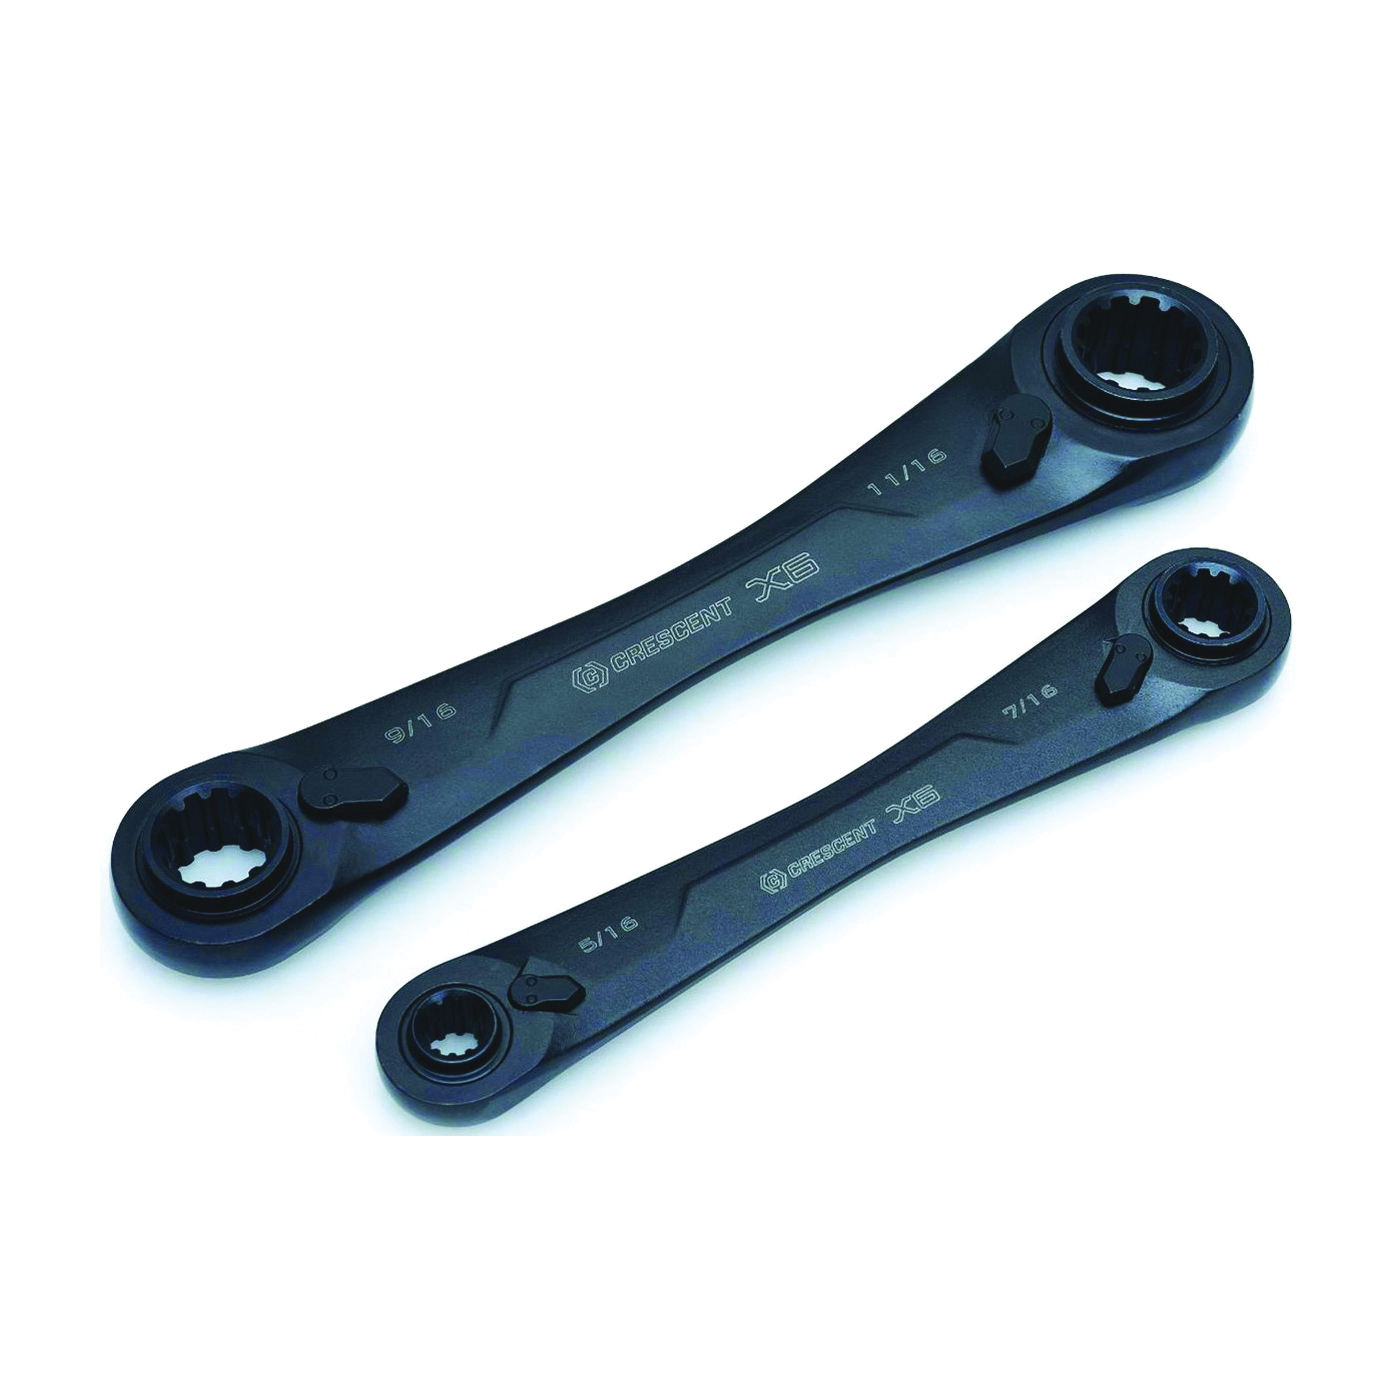 CX6DBS2 Wrench Set, 2-Piece, Black, Specifications: SAE Measurement